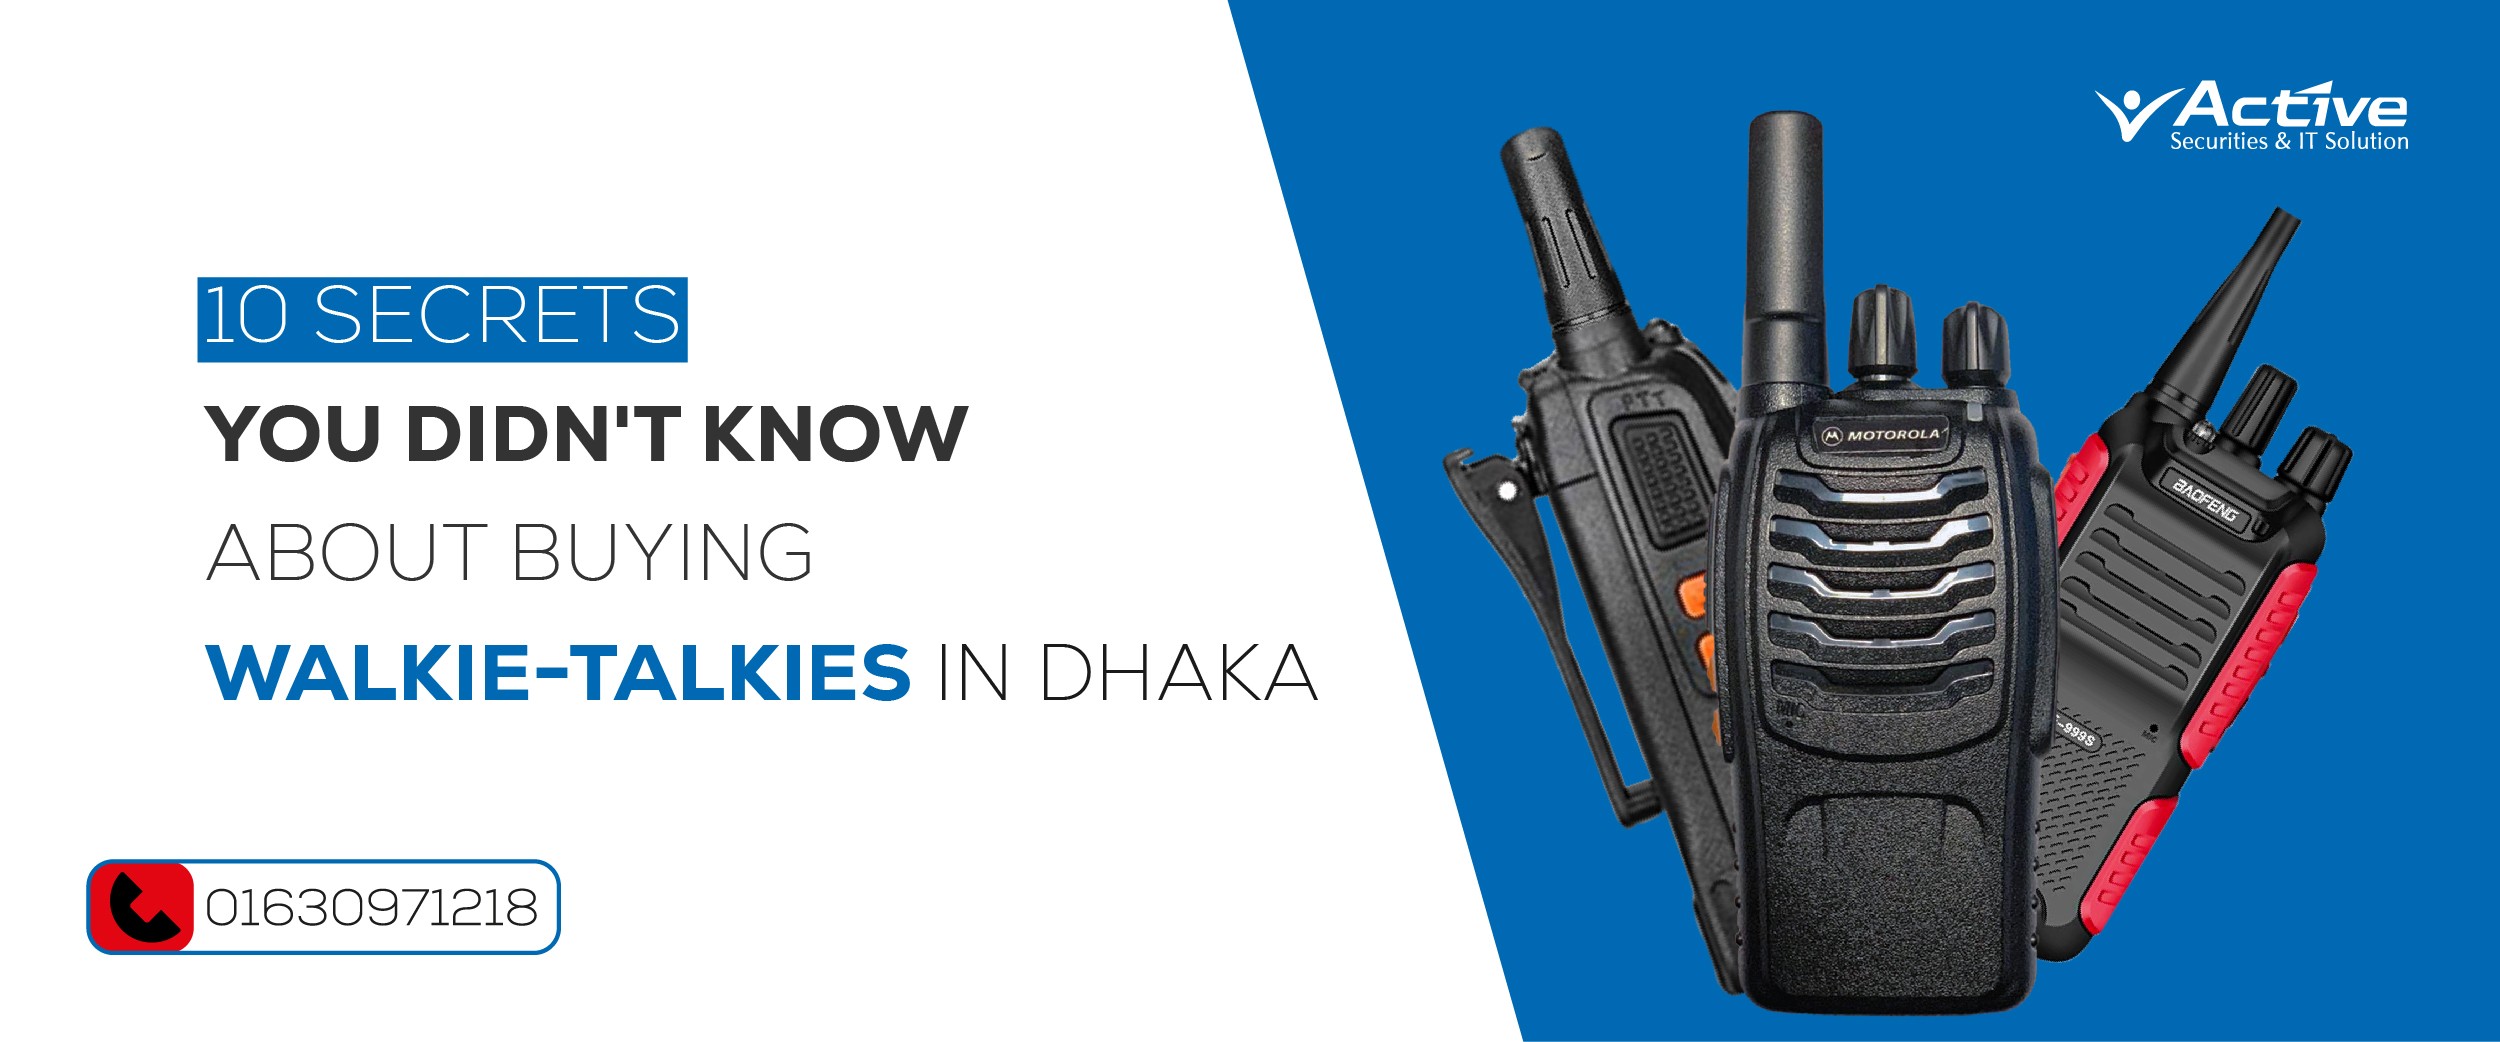 10 Secrets You Didn't Know About Buying Walkie-Talkies in Dhaka | Authorized Supplier